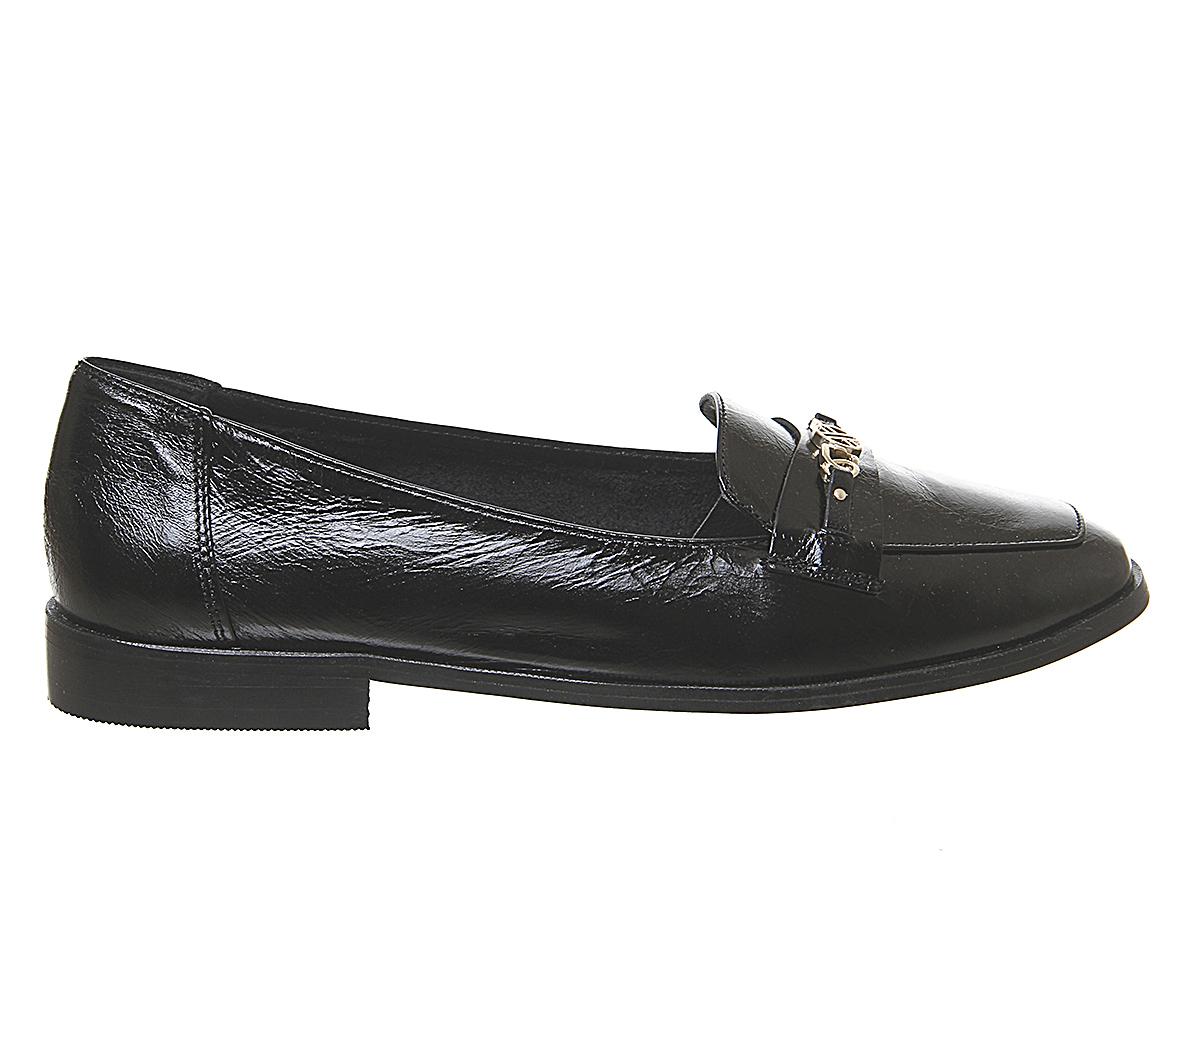 Office Fare Square Toe Flats Black Leather - Women’s Loafers